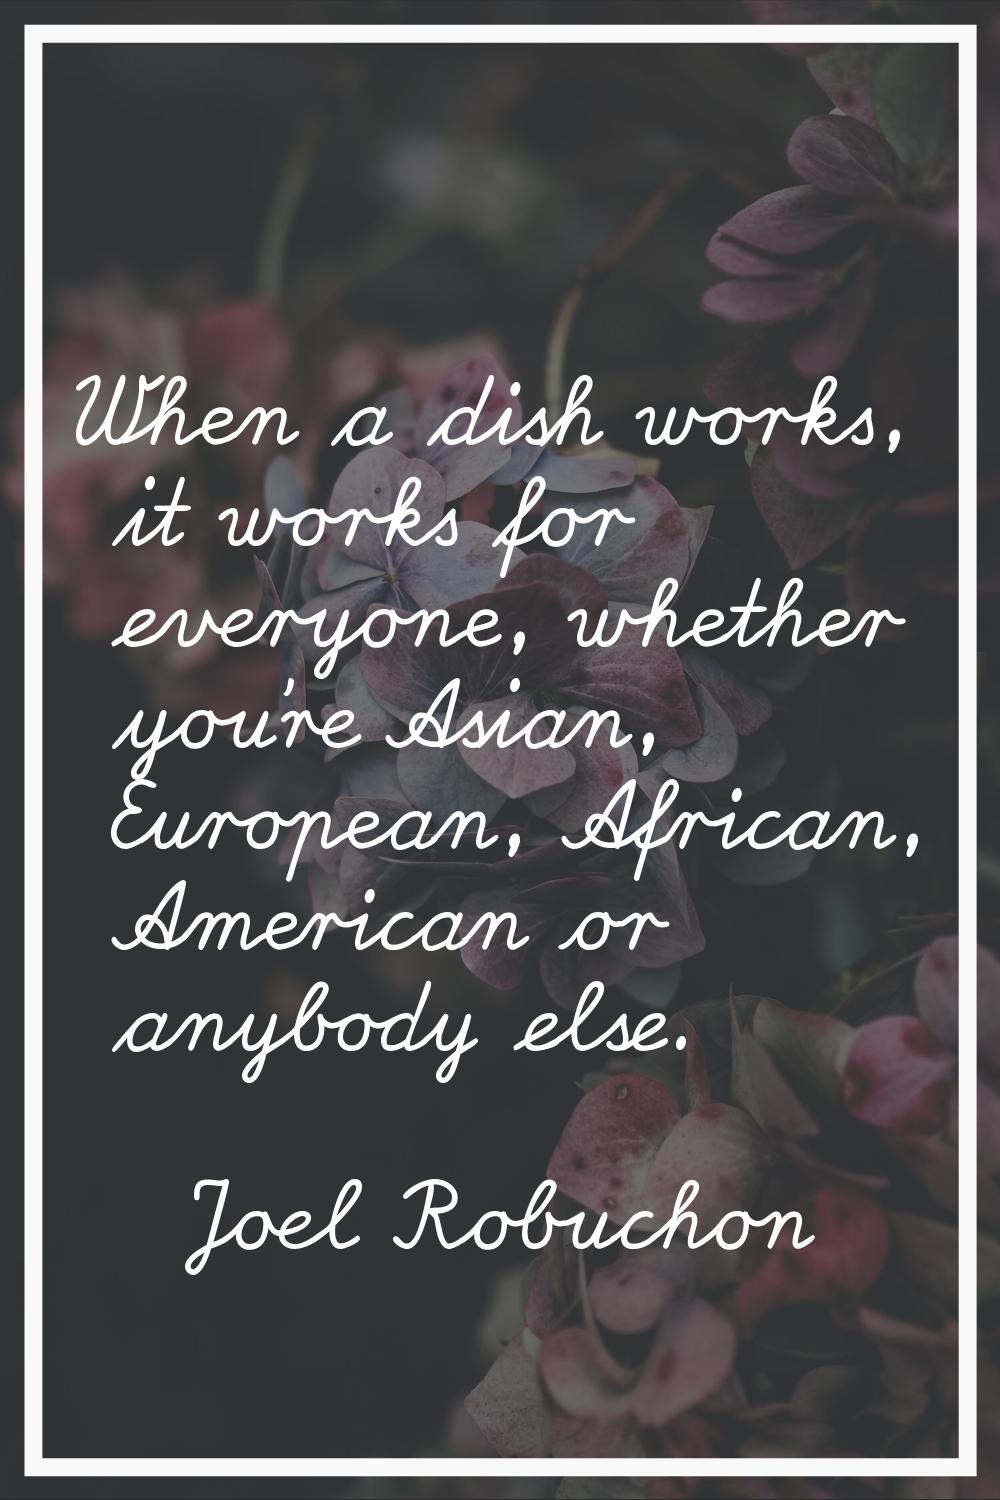 When a dish works, it works for everyone, whether you're Asian, European, African, American or anyb